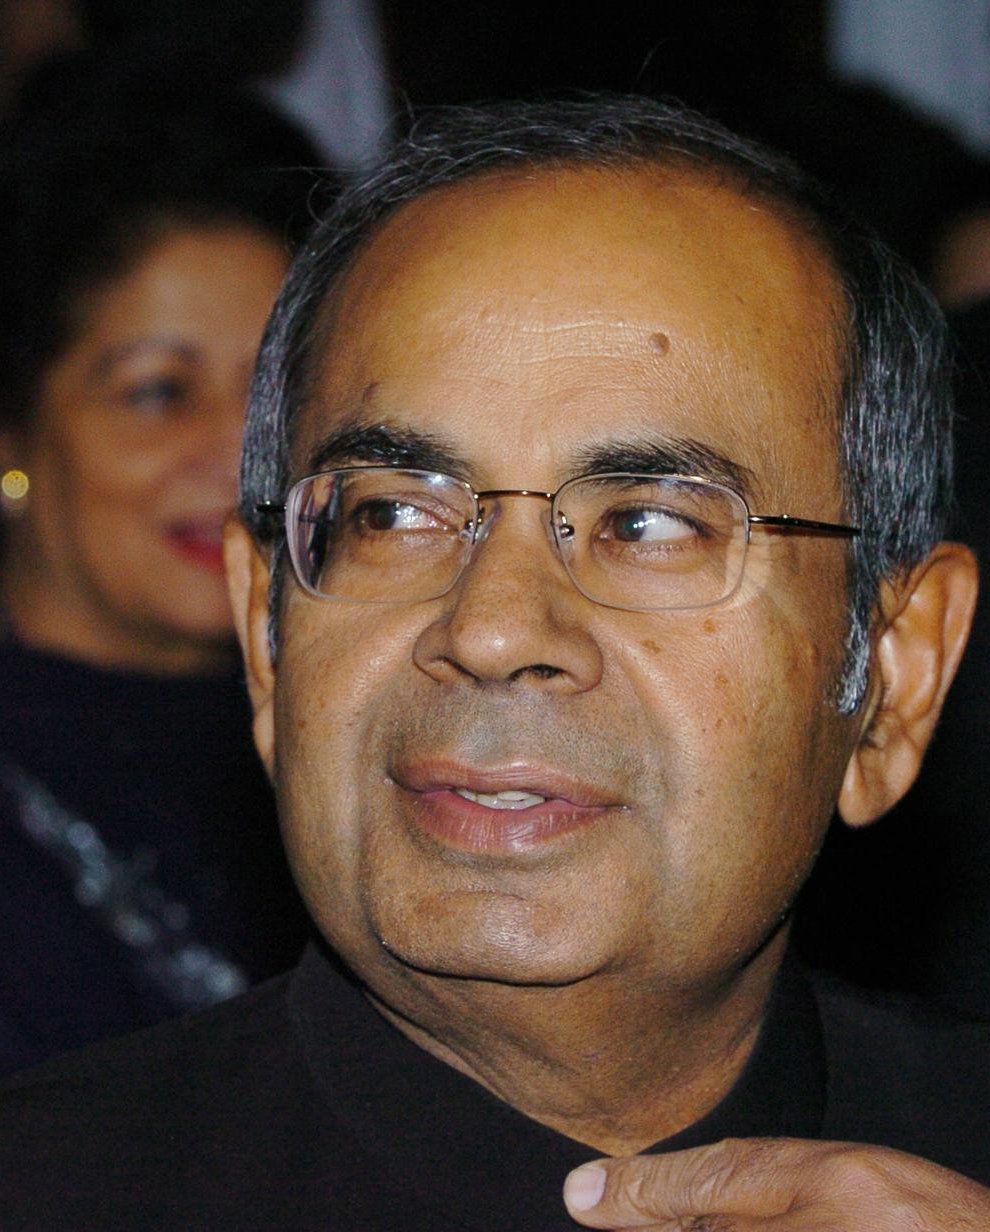 Gopi Hinduja and his brother Sri topped the Sunday Times Rich List 2022 (Michael Stephens/PA)